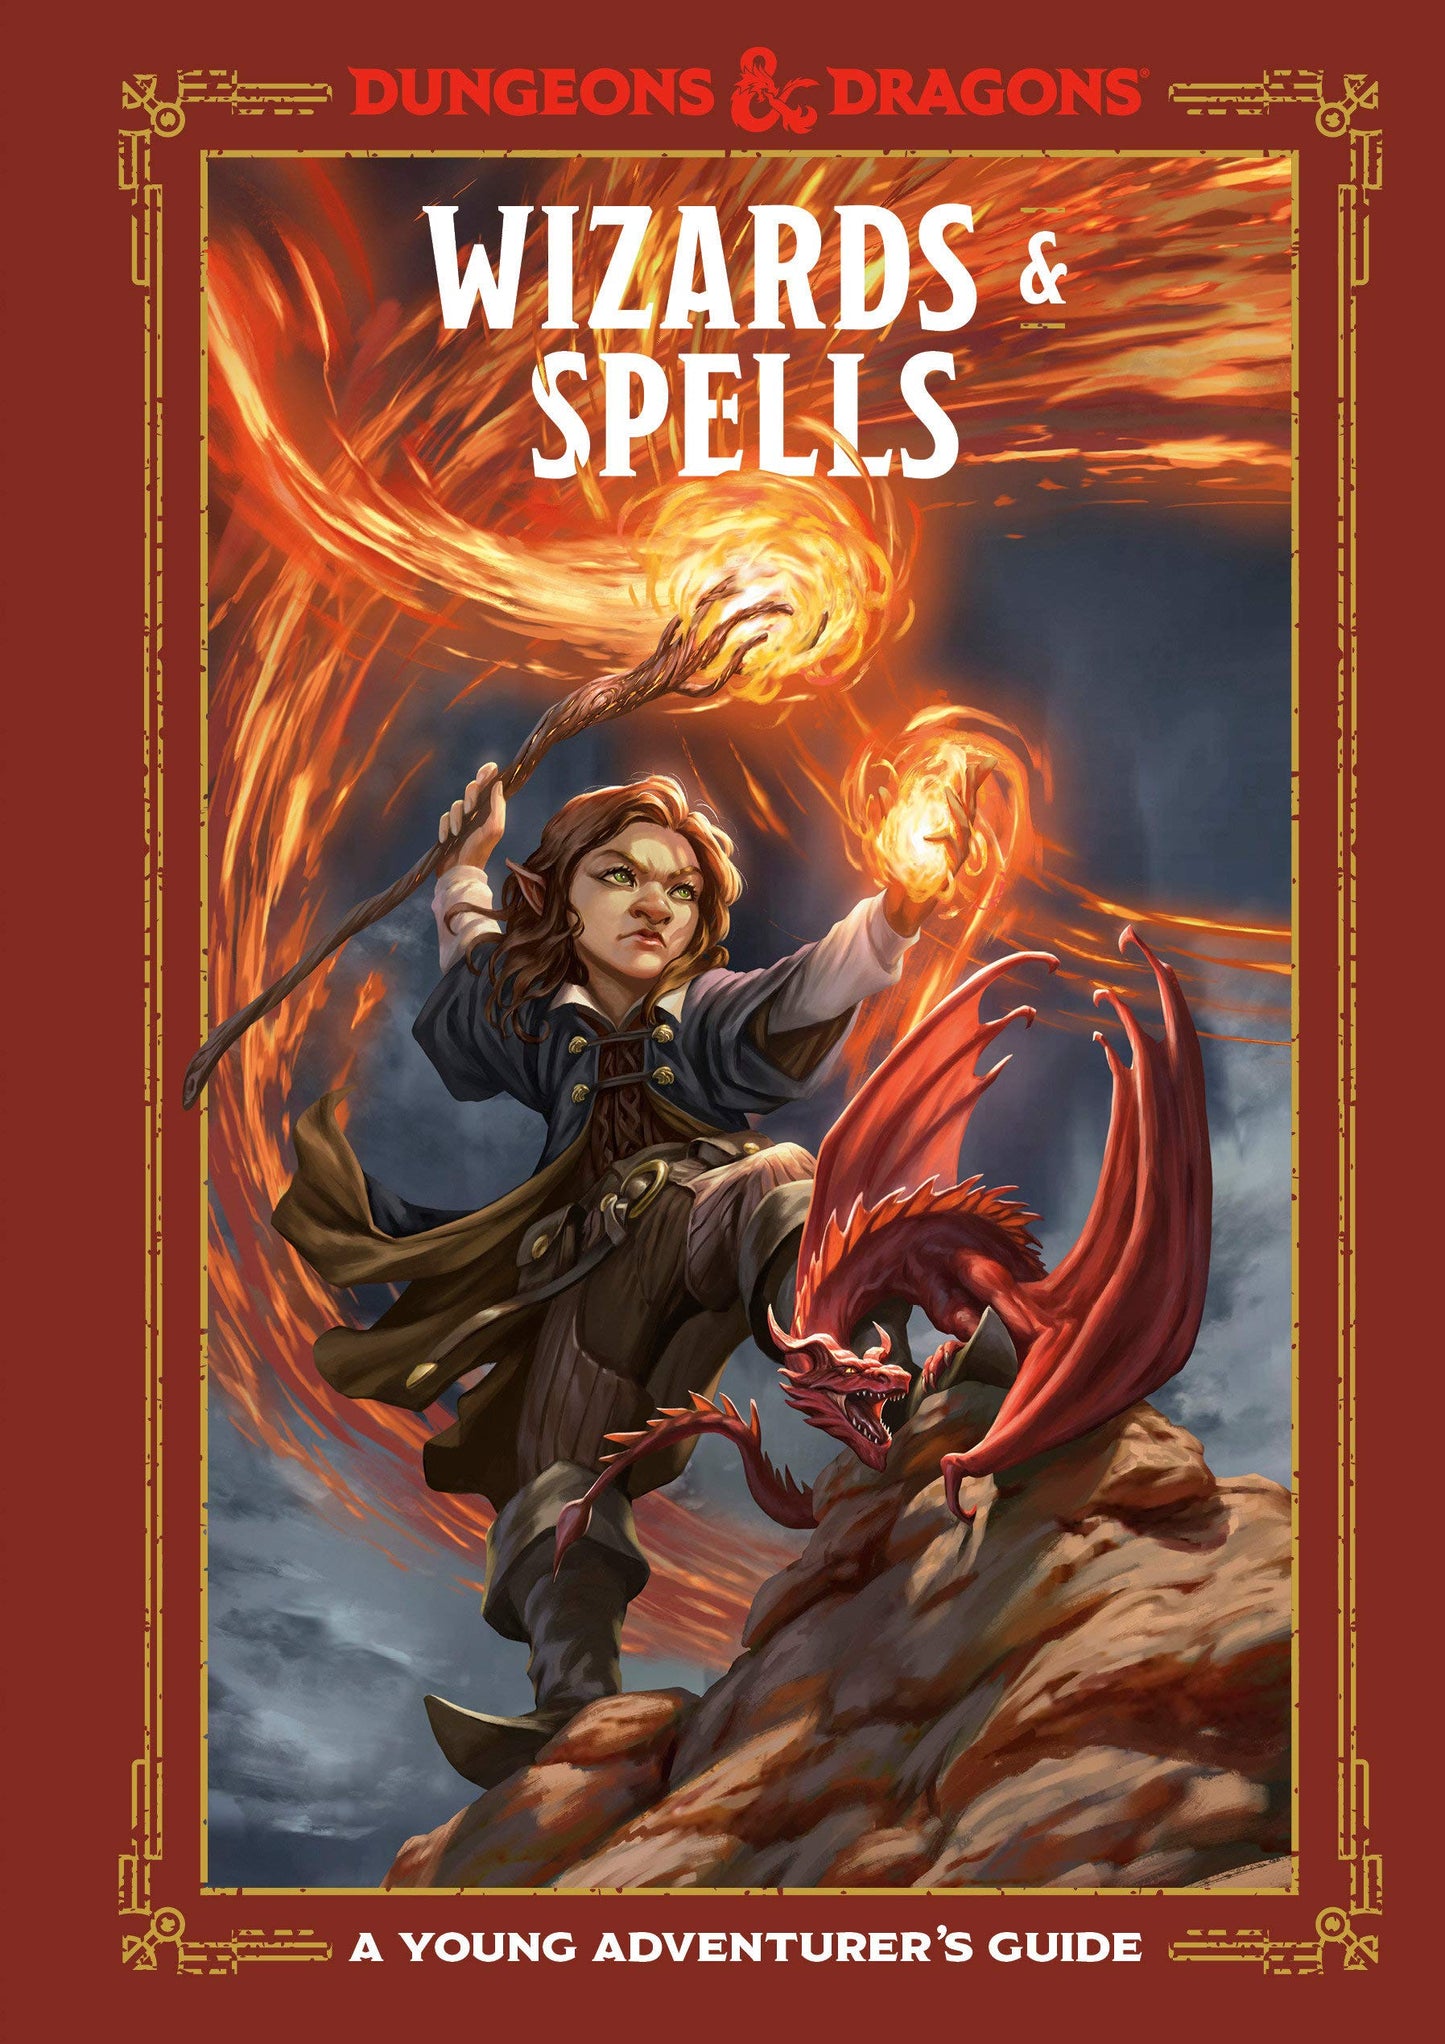 Dungeons and Dragons Wizards & Spells: A Young Adventurer's Guide